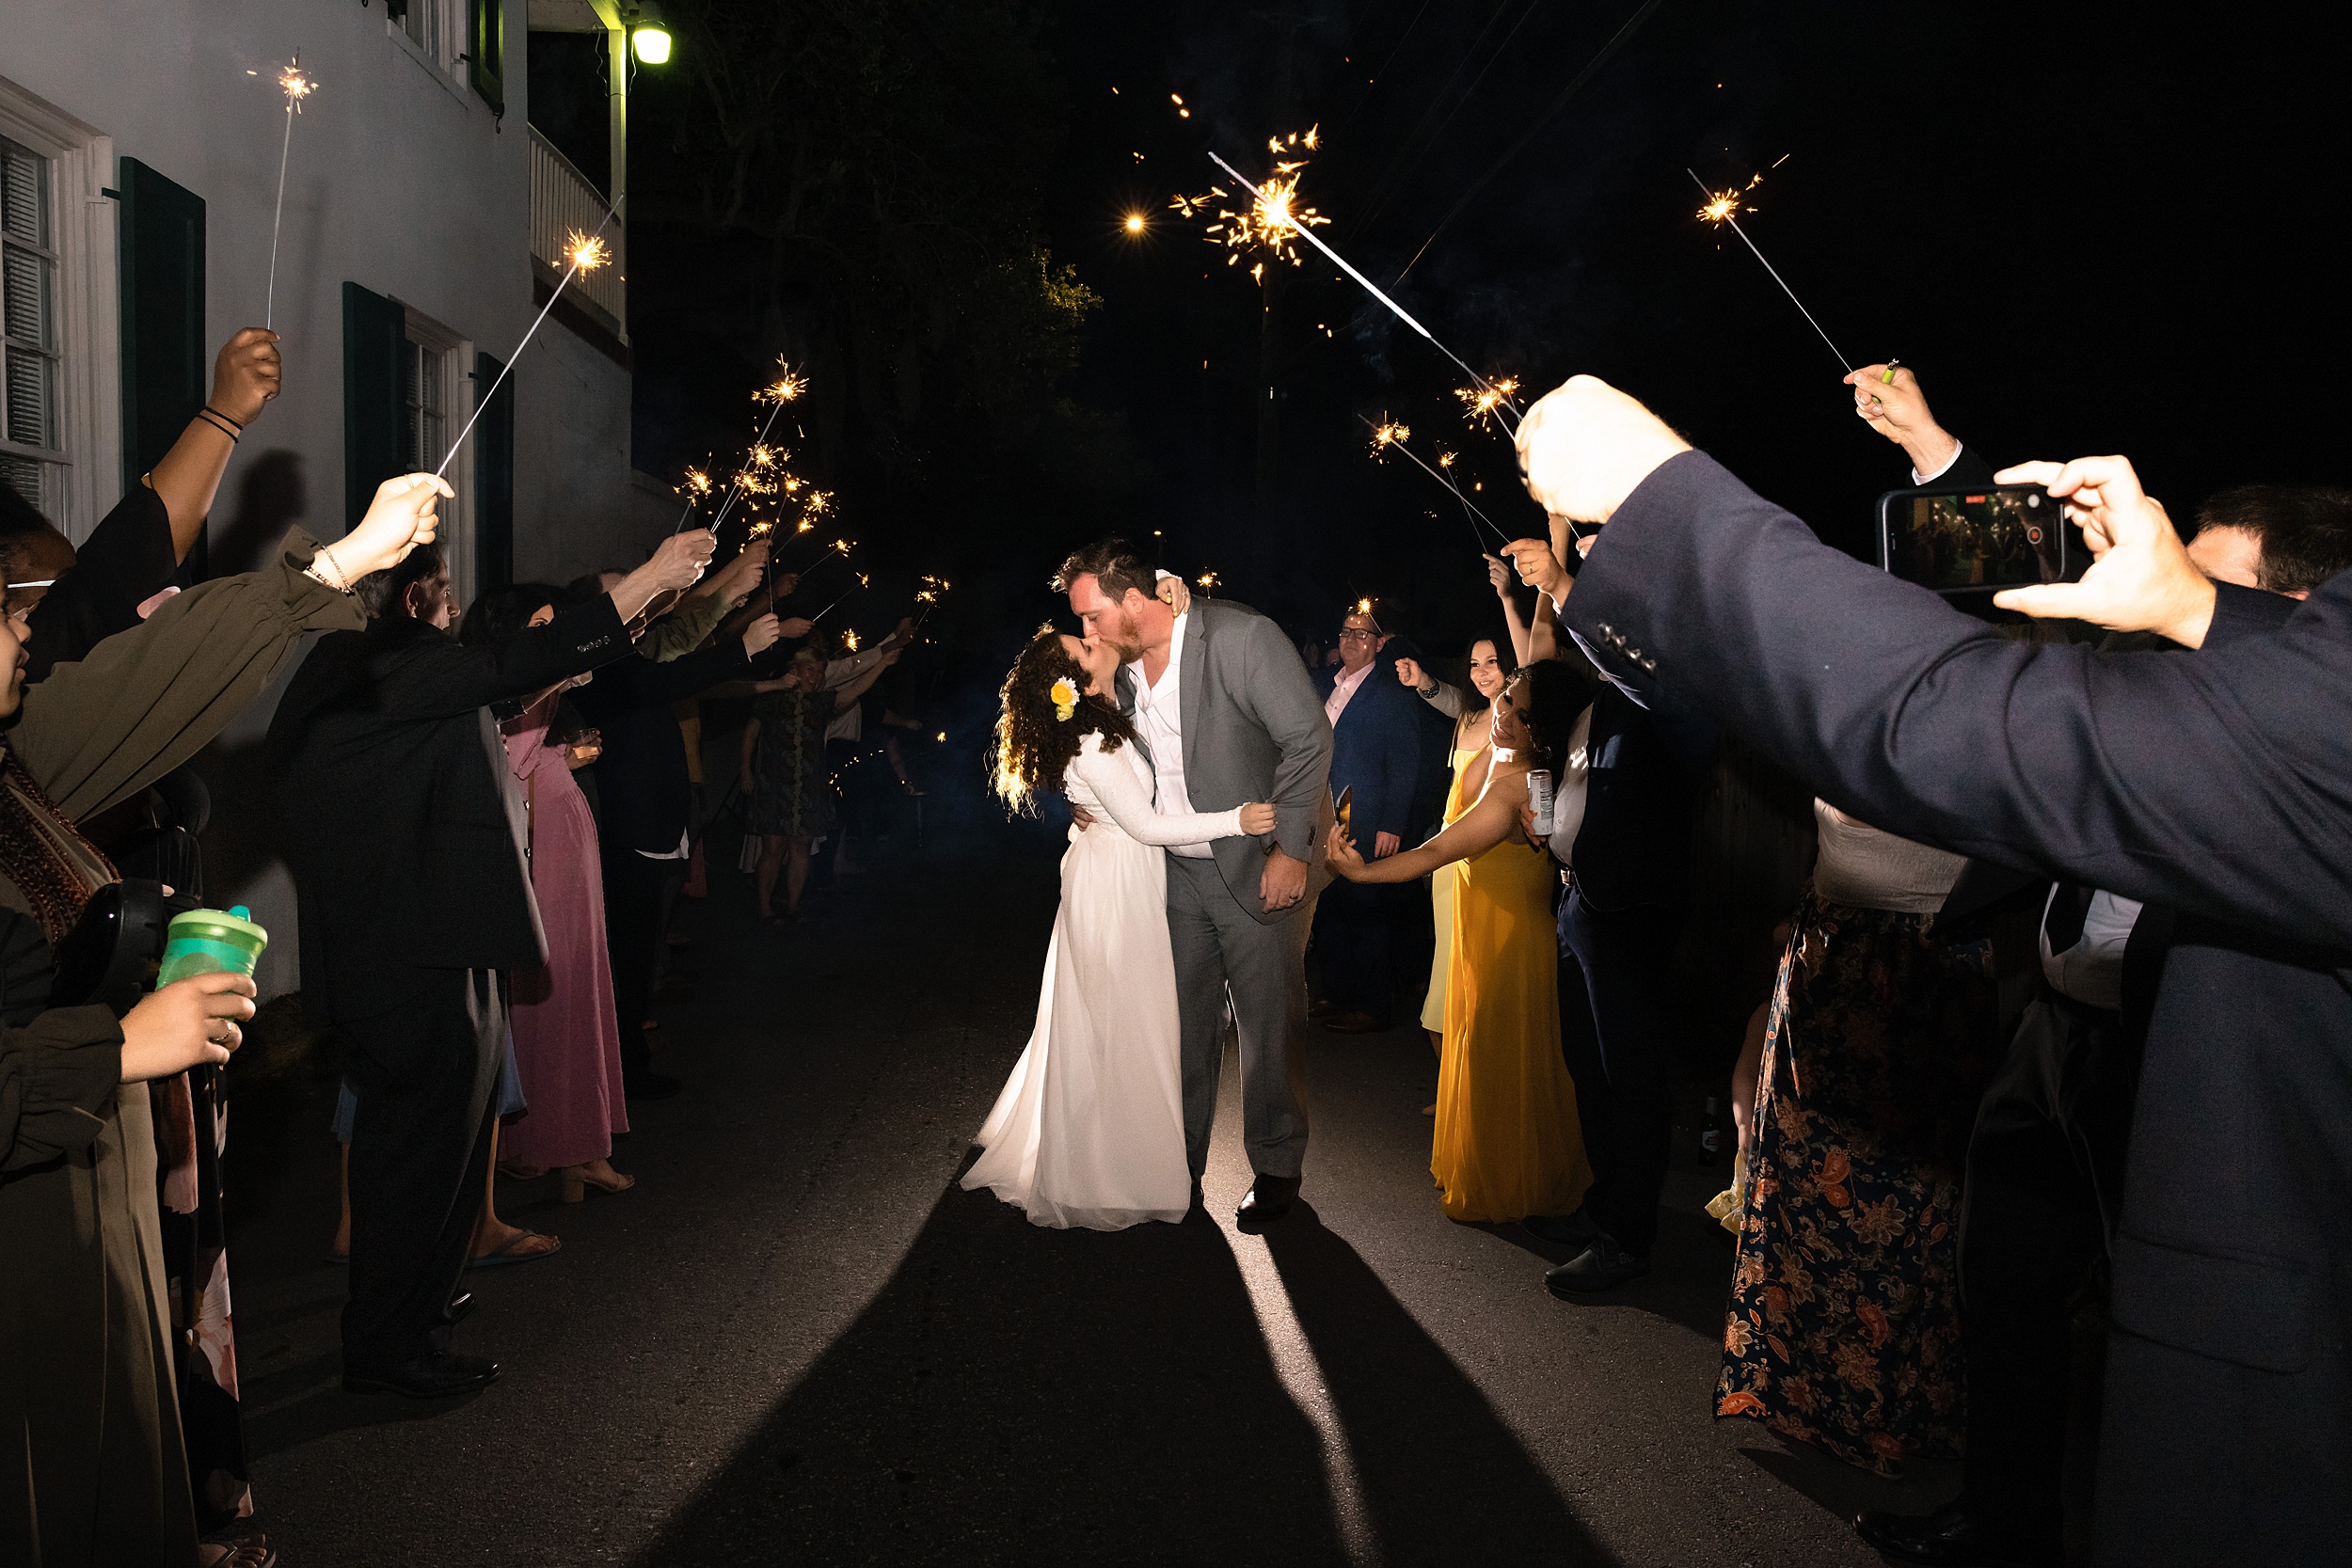 Newlyweds kiss under a shower of sparklers while exiting their wedding at one of the orlando wedding venues